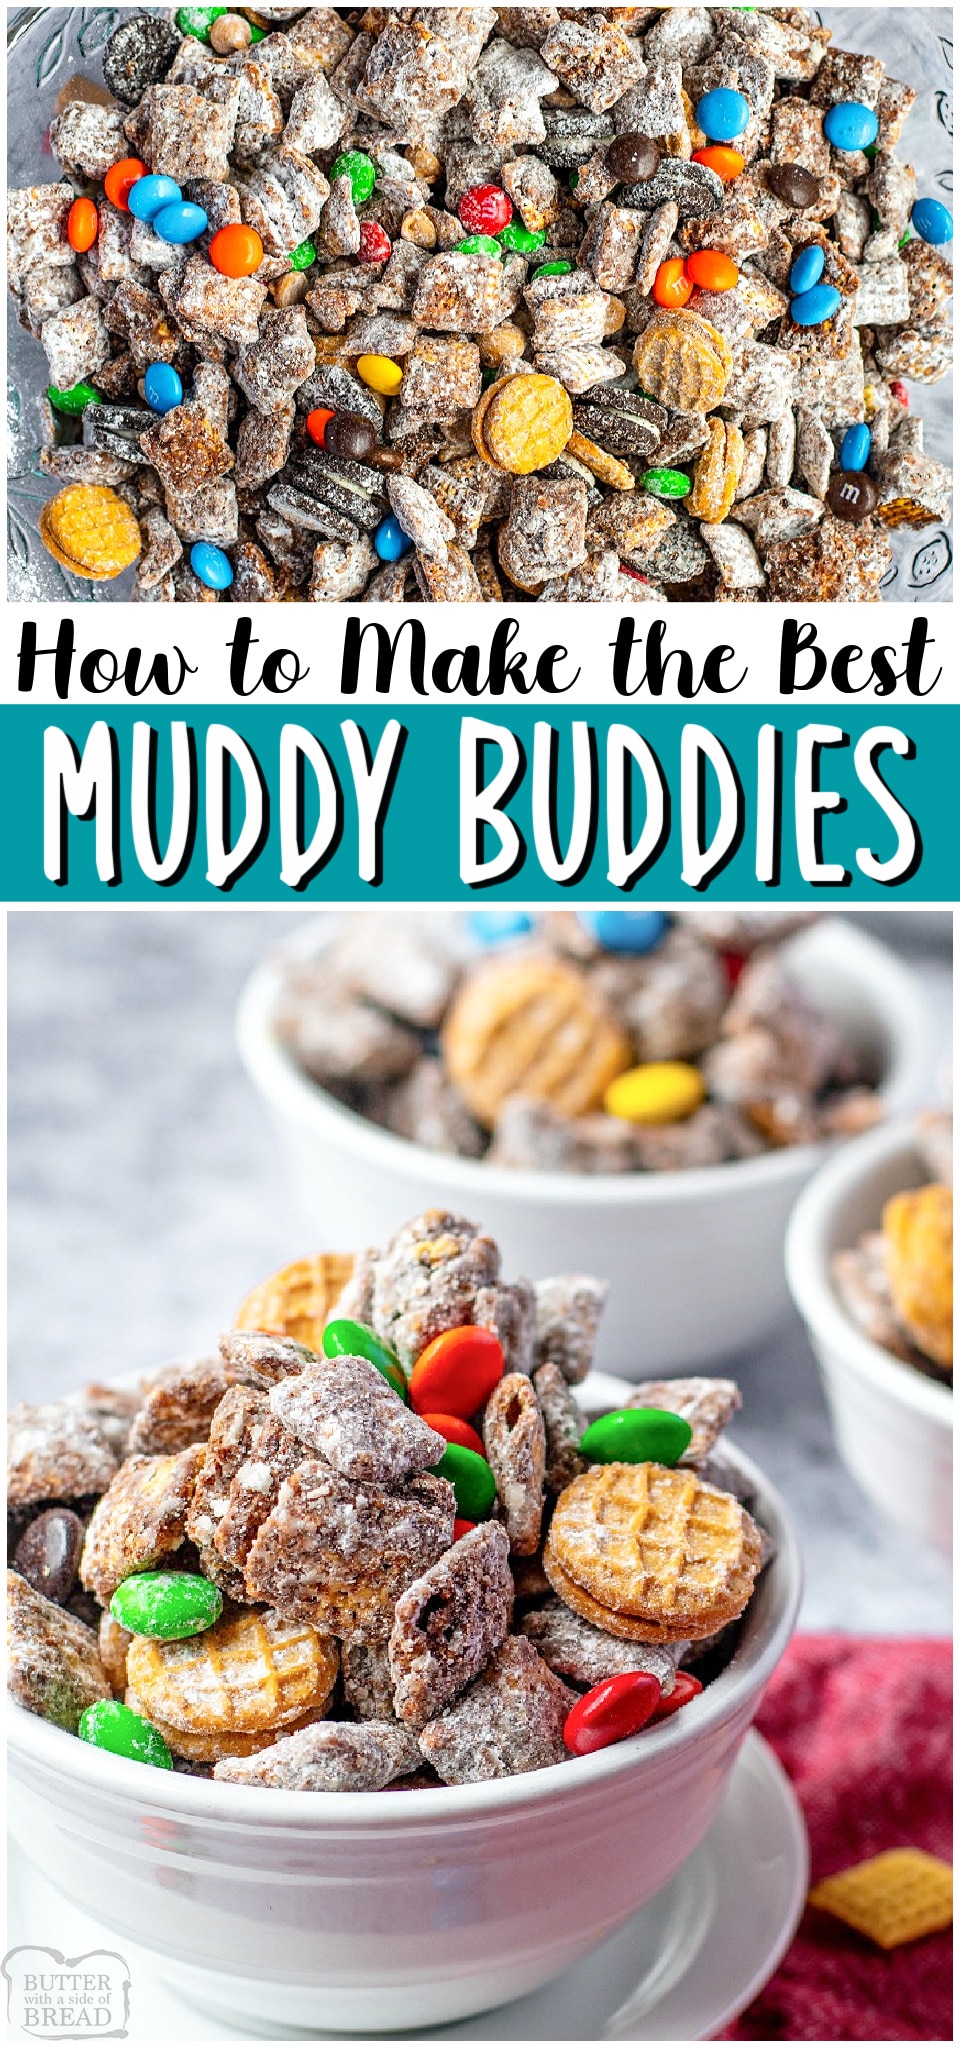 Come learn How to Make Muddy Buddies! Classic Chex cereal treat with delicious add-ins for a fun & tasty dessert snack mix that everyone loves!